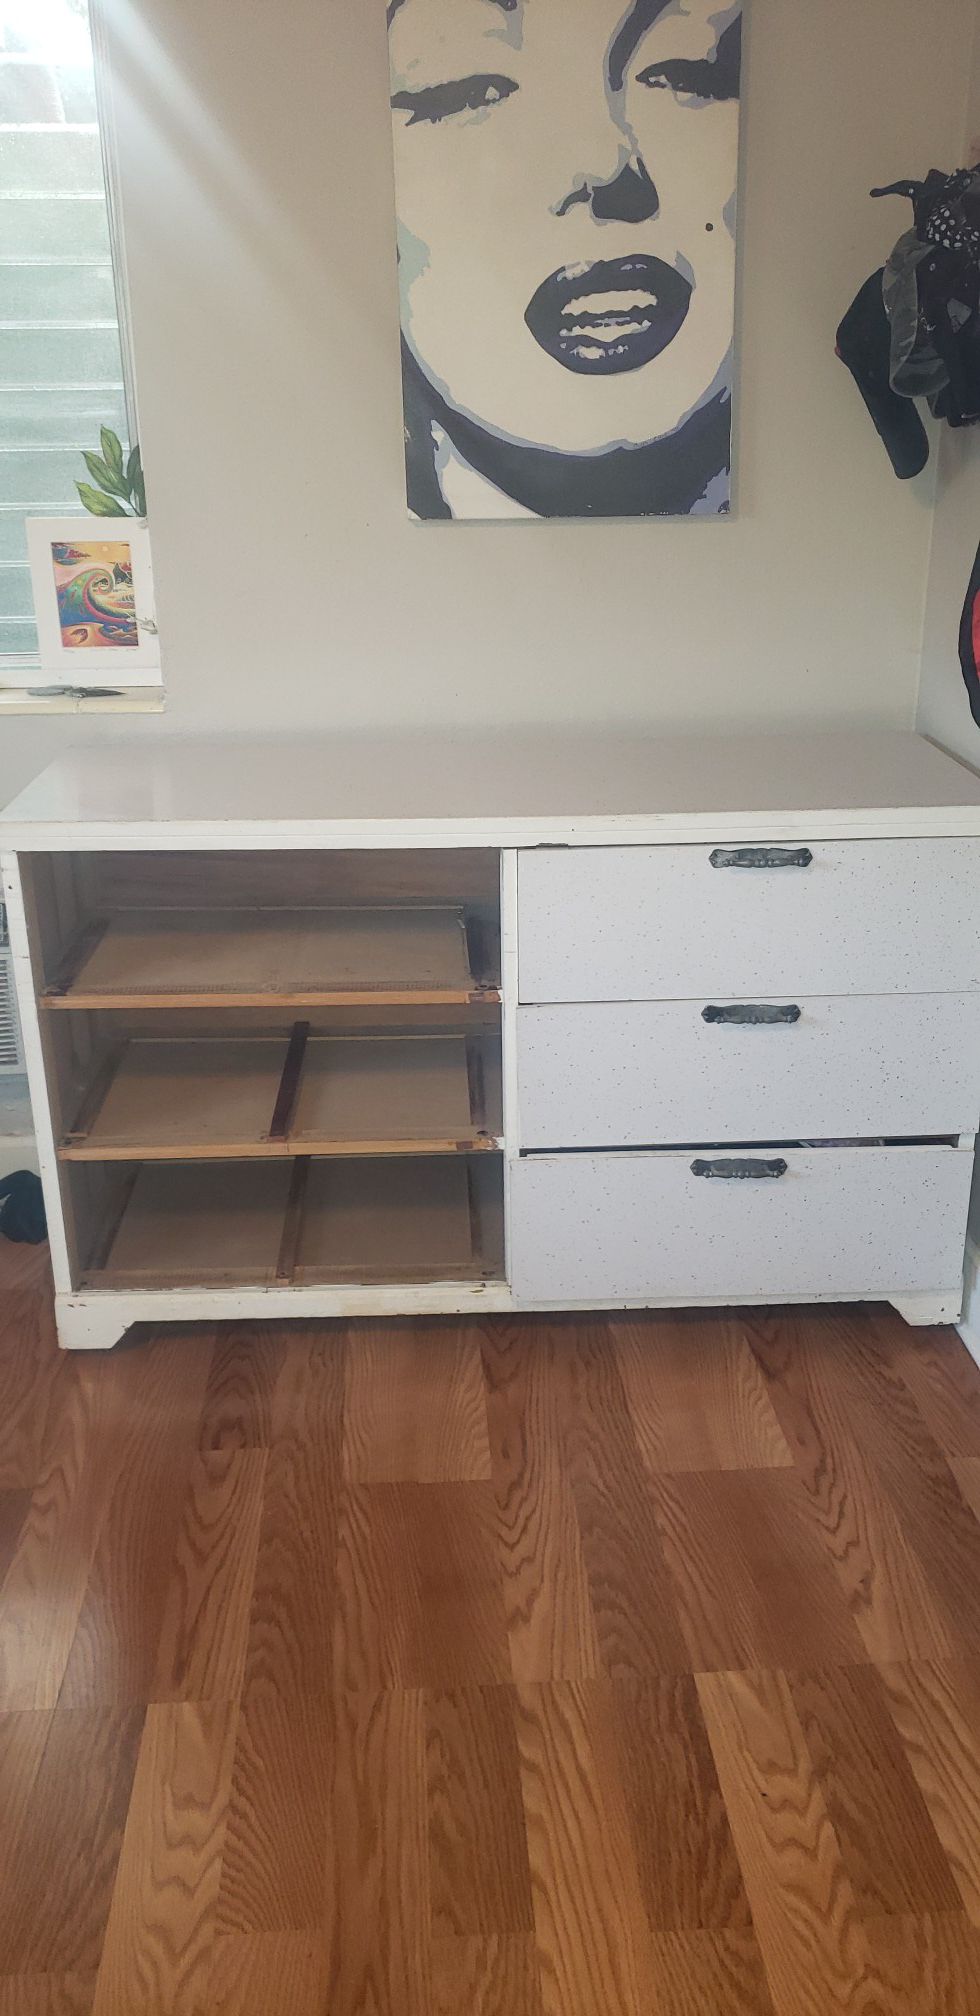 FREE Beautiful retro classic dresser. Real wood, not particle board. All drawers included